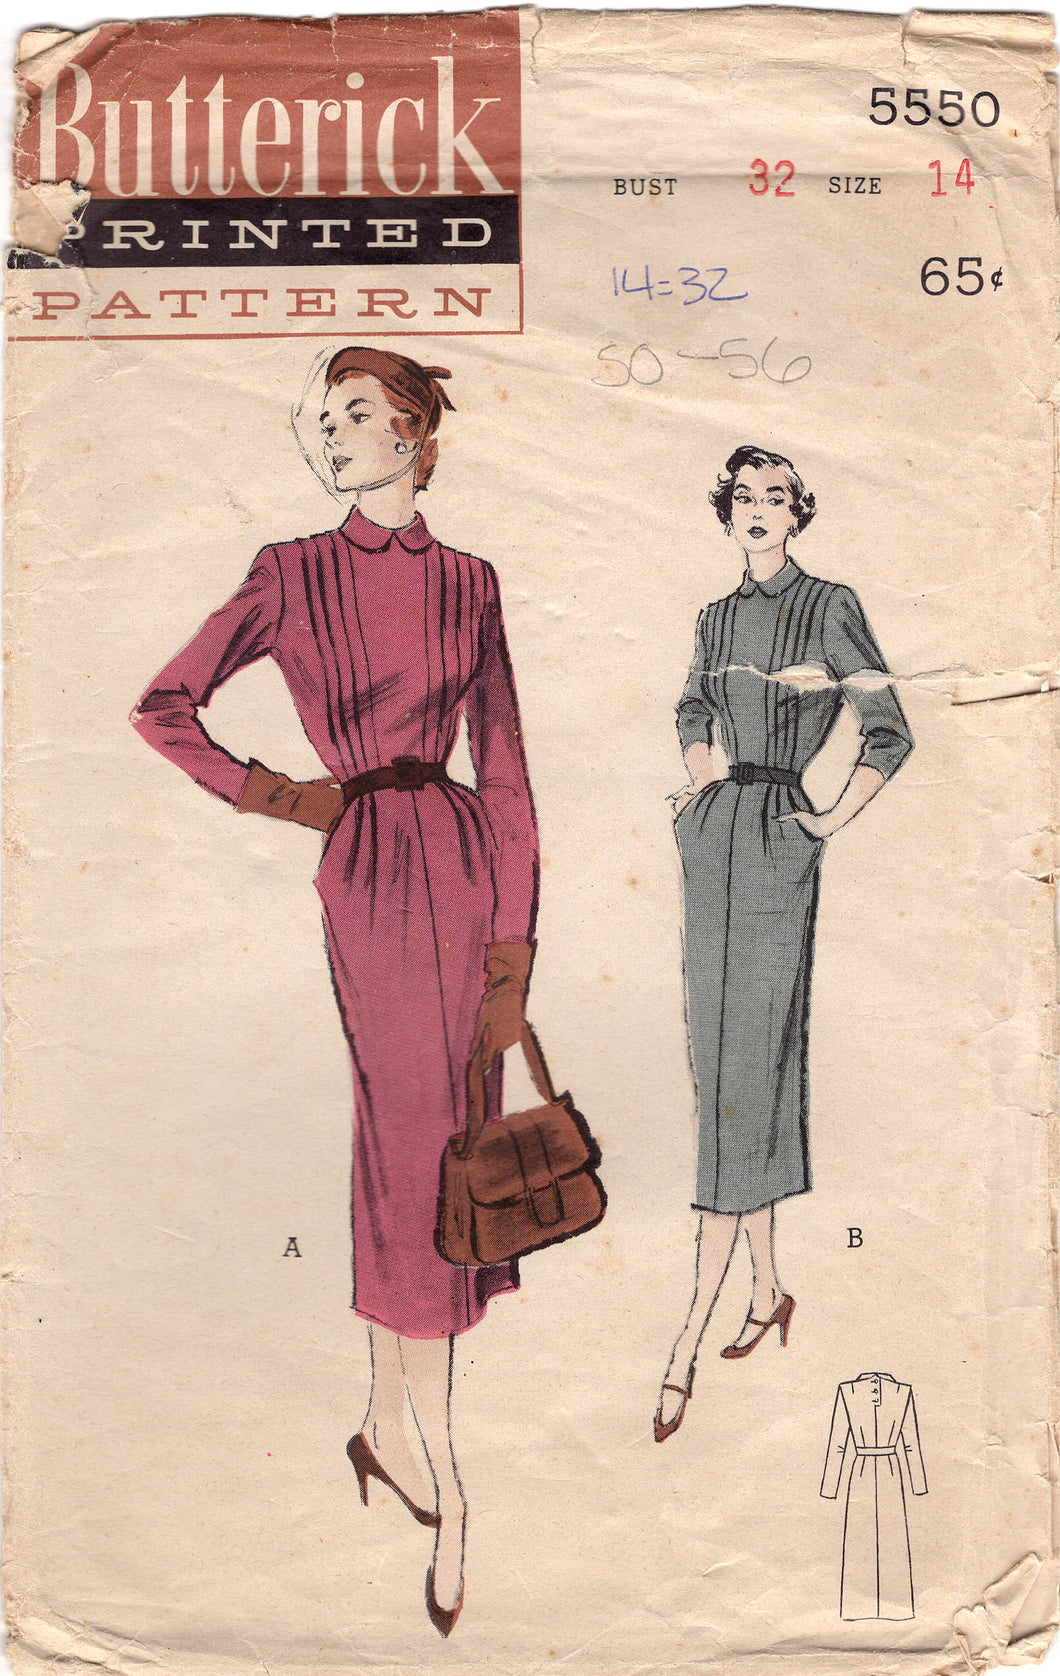 1950's Butterick One Piece Pin Tuck Dress Pattern with Peter Pan Collar - Bust 32